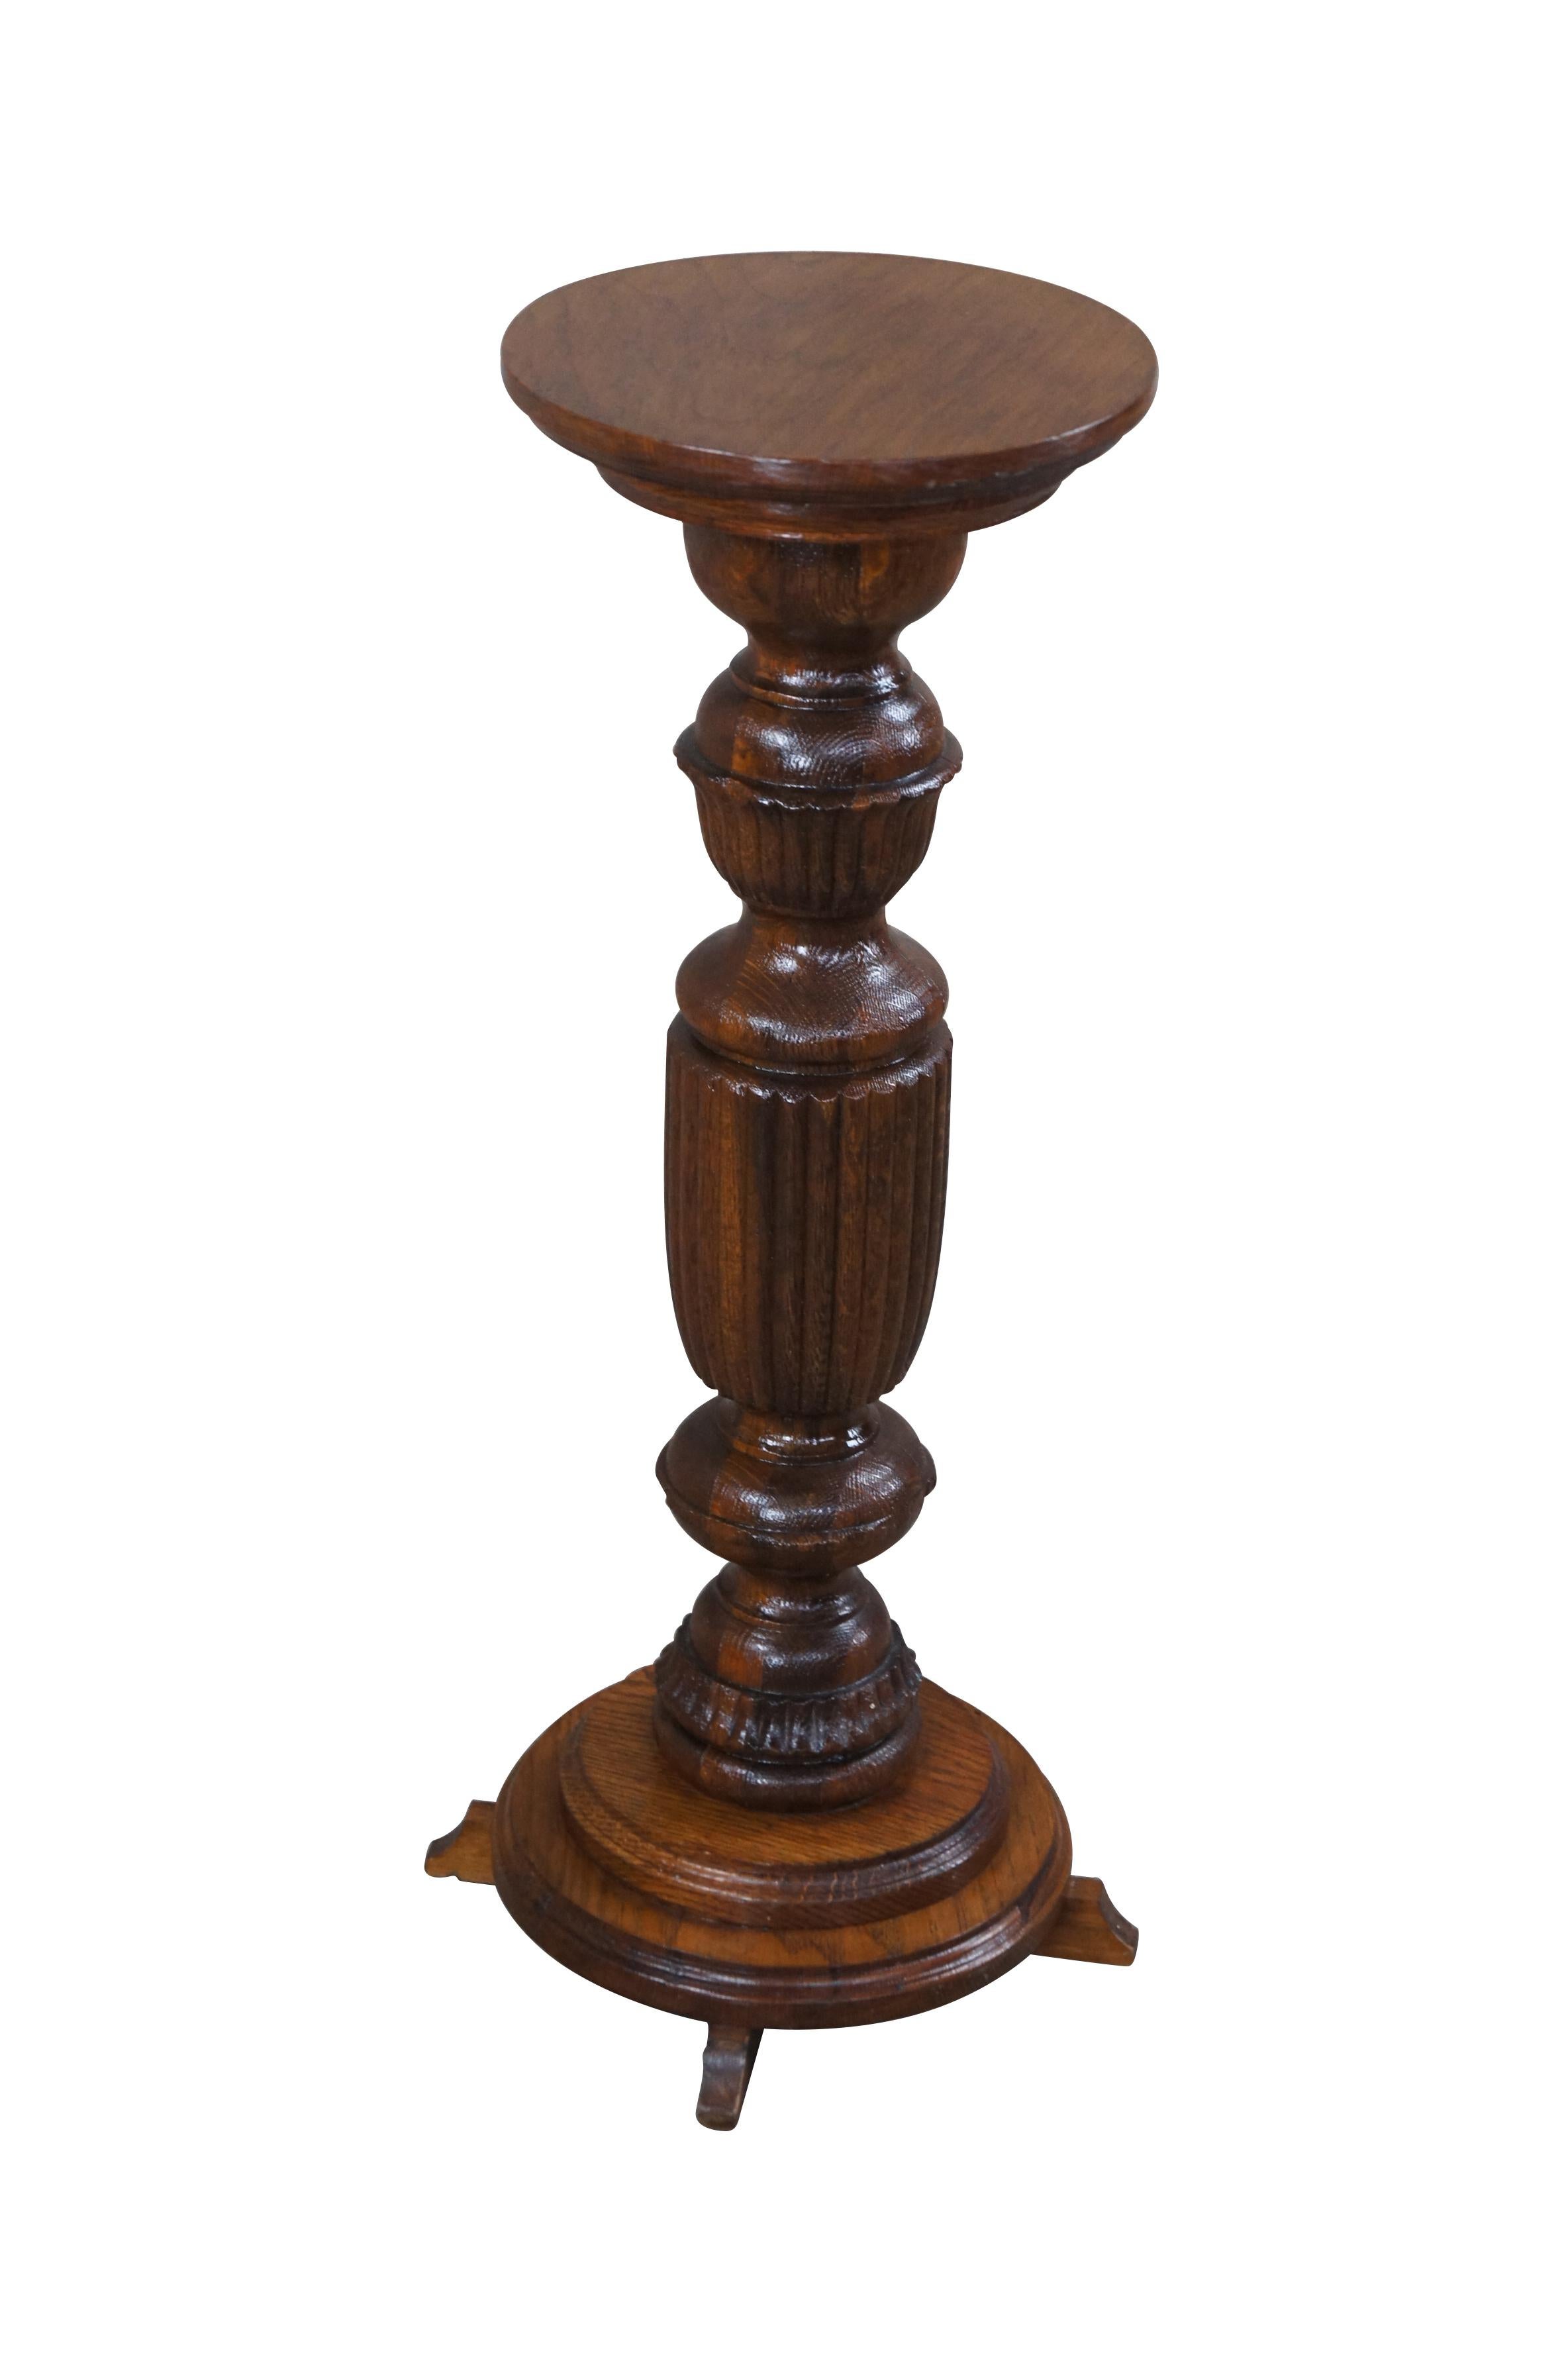 Victorian era oak pedestal, circa late 19th century. Features a beautifully turned column with reeded center over tiered and footed base. Great for display of plants and sculptures.

Dimensions:
29.25